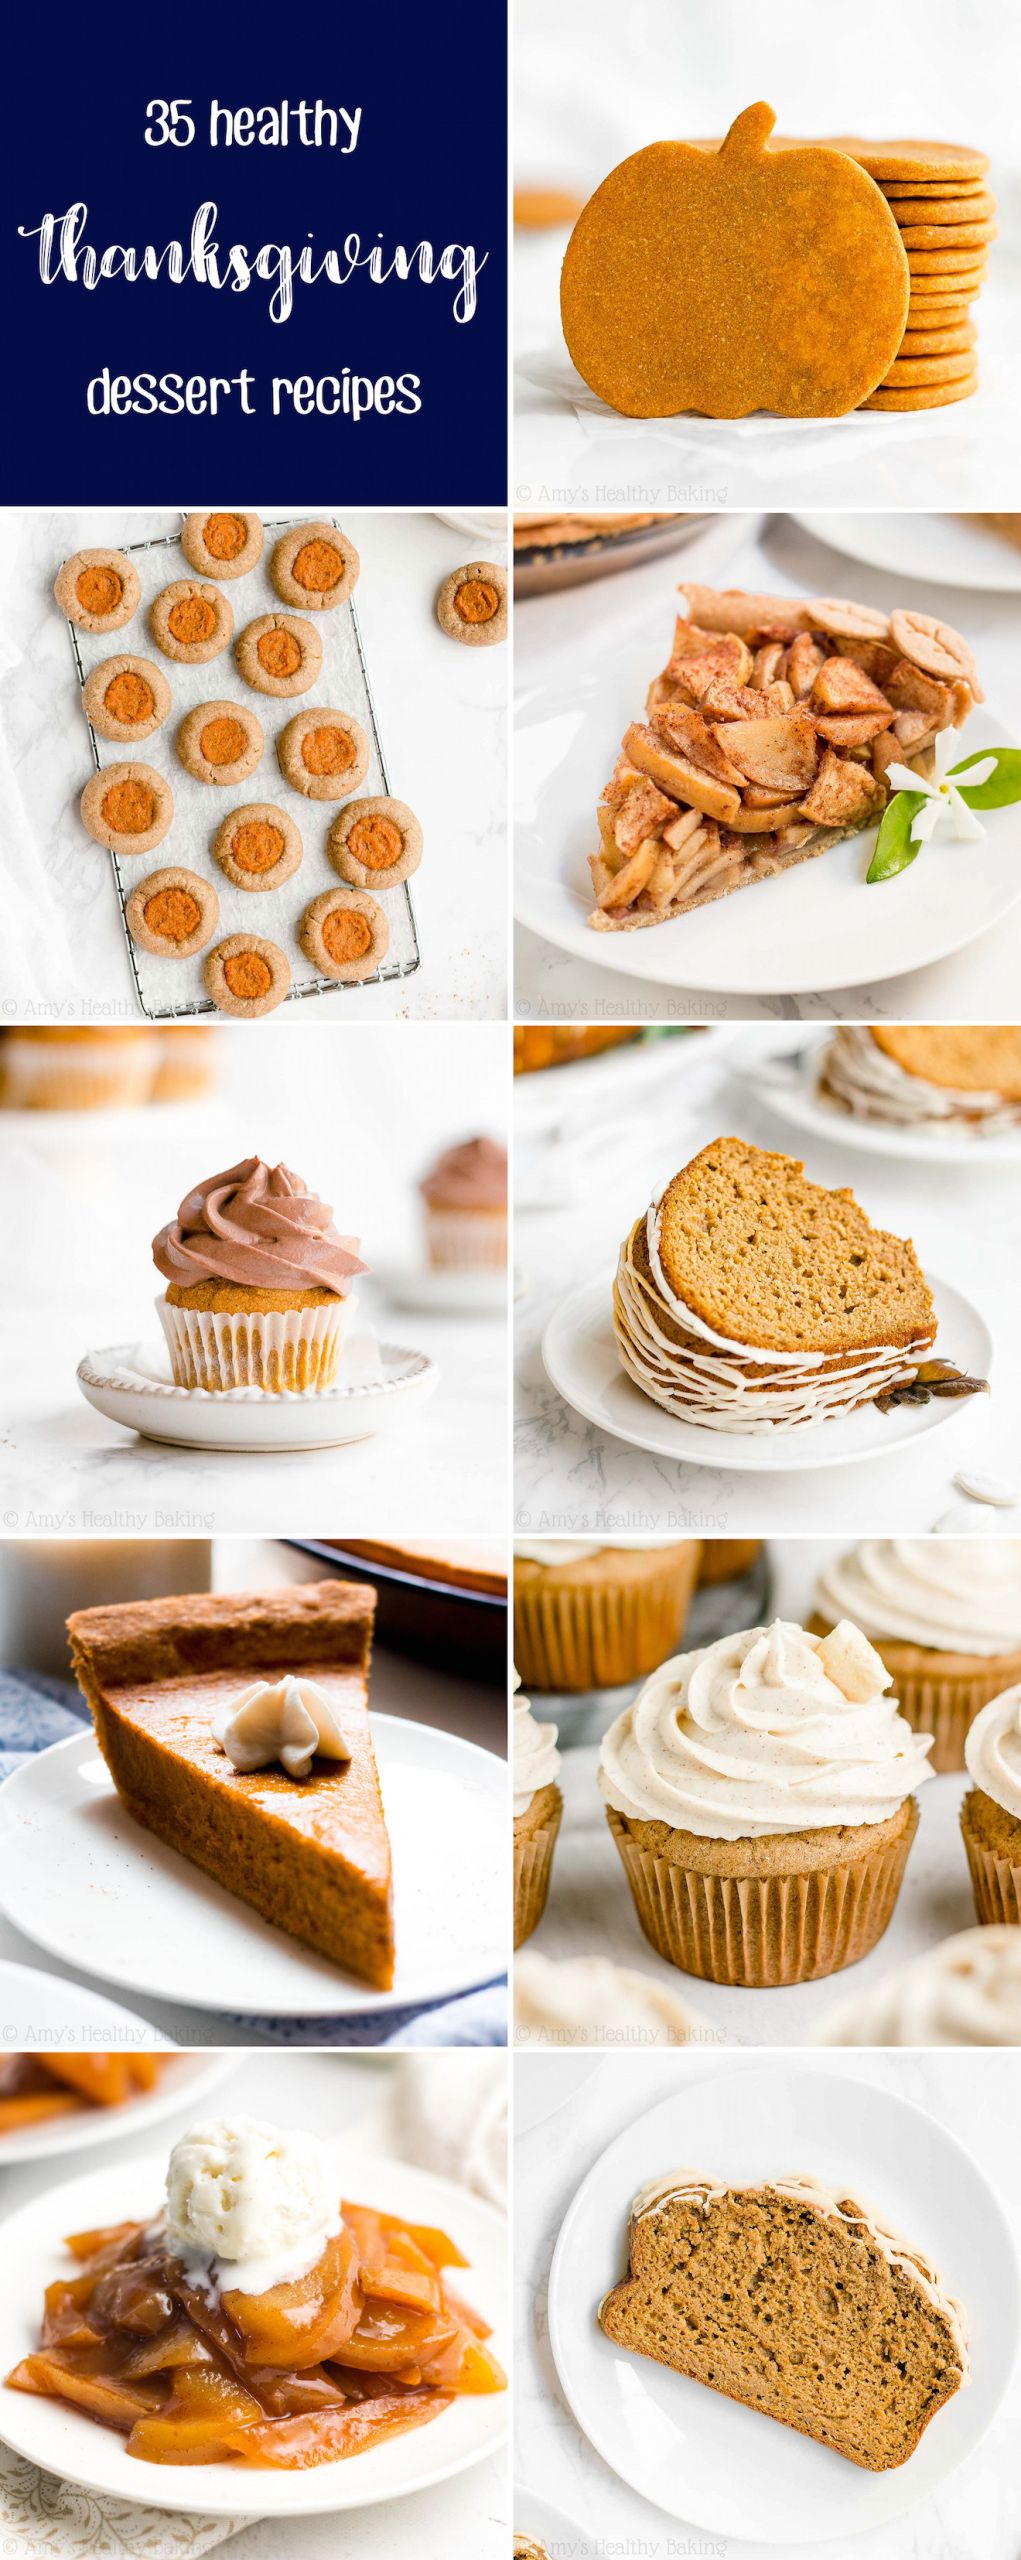 Low Calorie Thanksgiving Recipes
 The Best Low Calorie Thanksgiving Desserts Most Popular